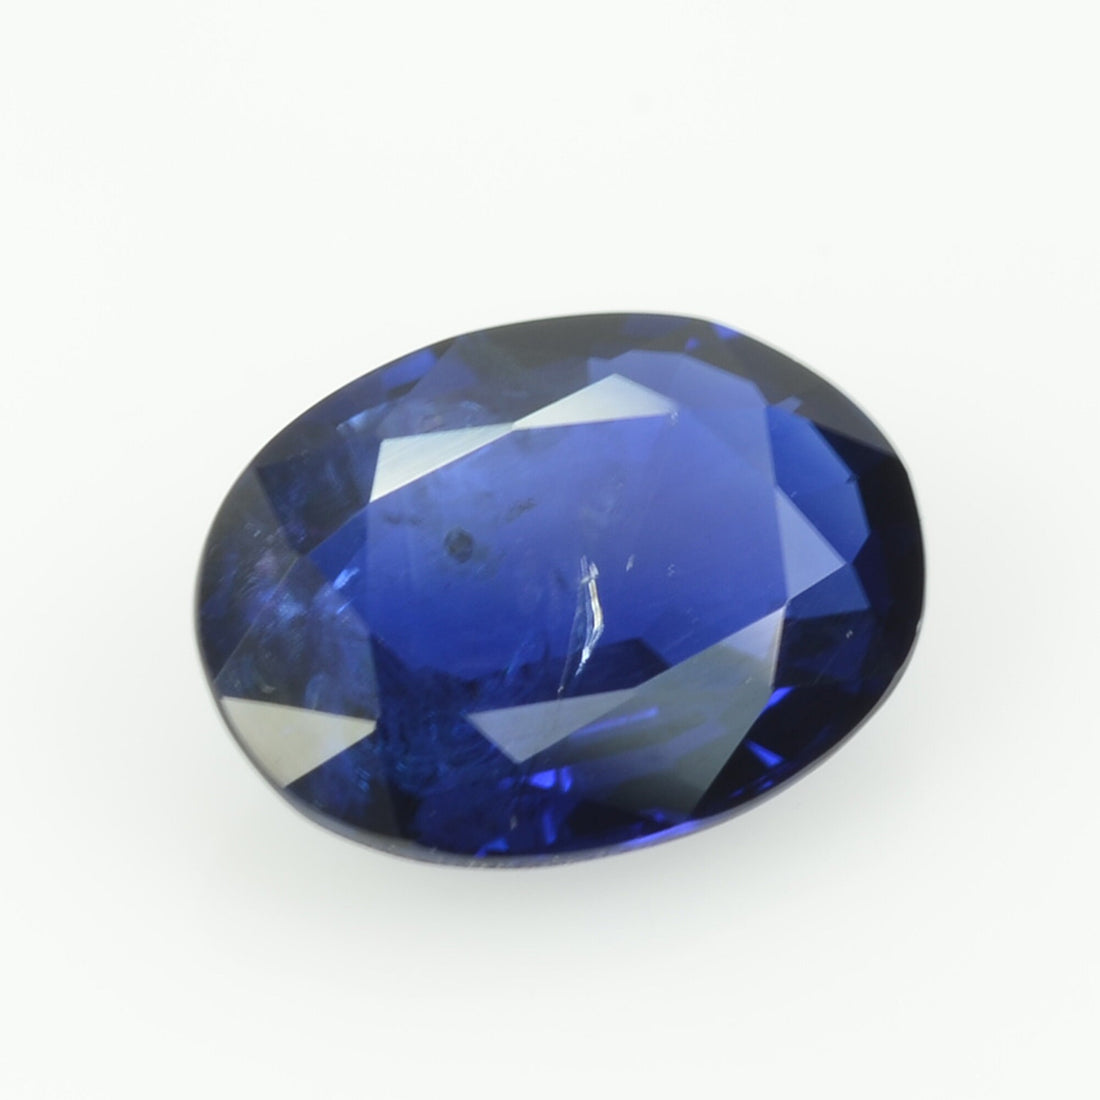 1.82 Cts Natural Blue Sapphire Loose Gemstone Oval Cut